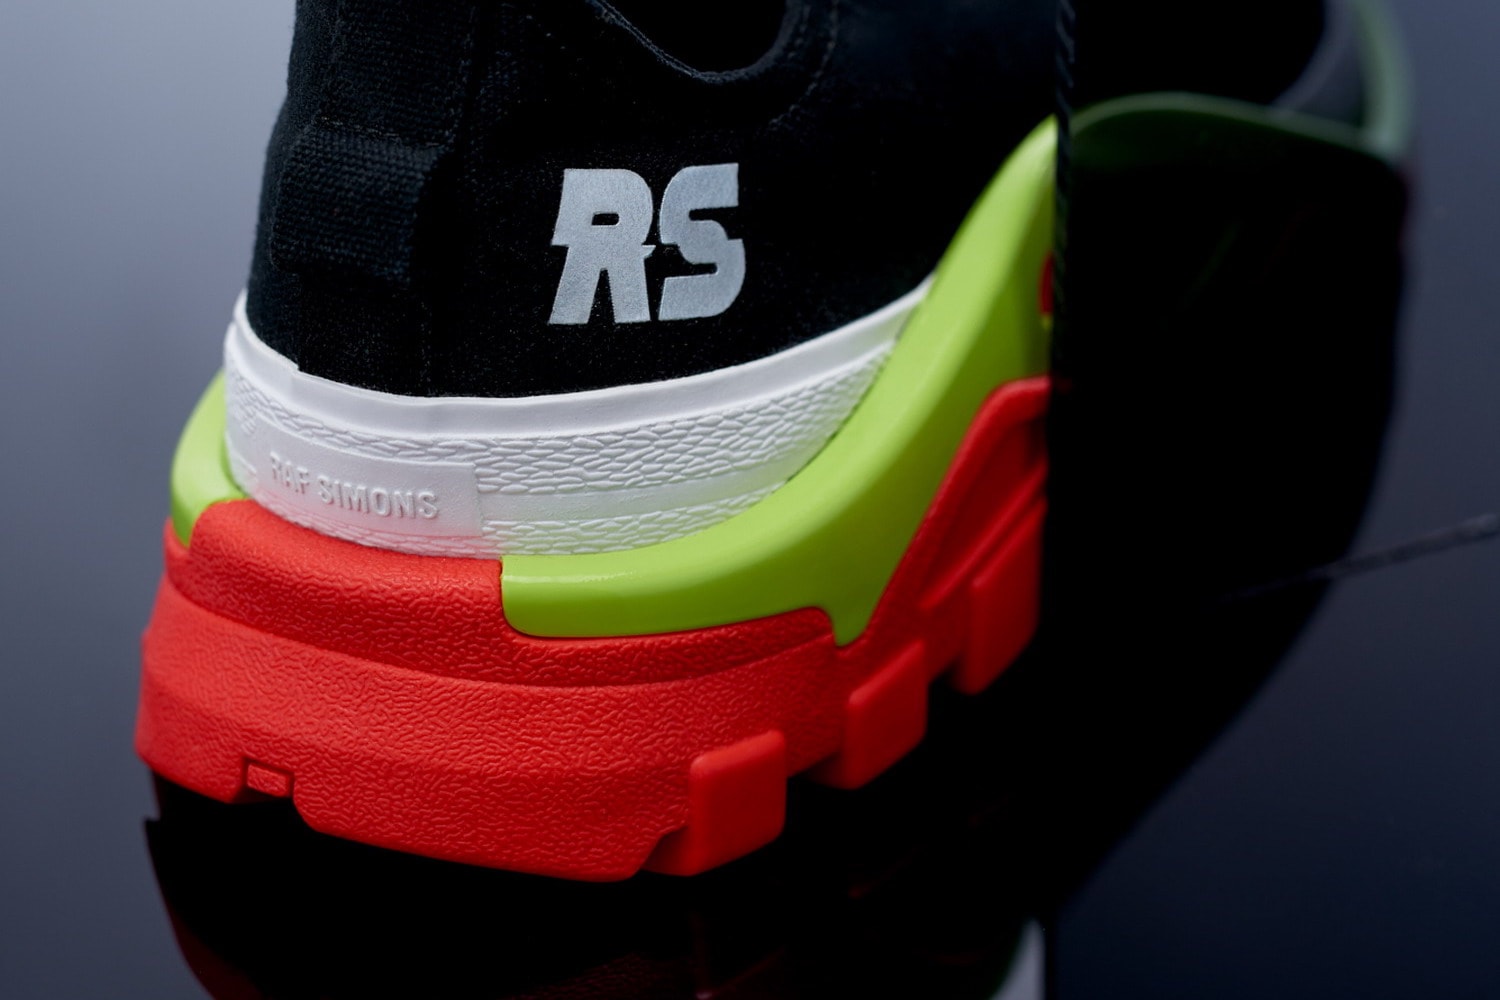 adidas by Raf Simons 2019 春夏全新 RS Detroit Runner 及 RS Ozweego Replicant 系列